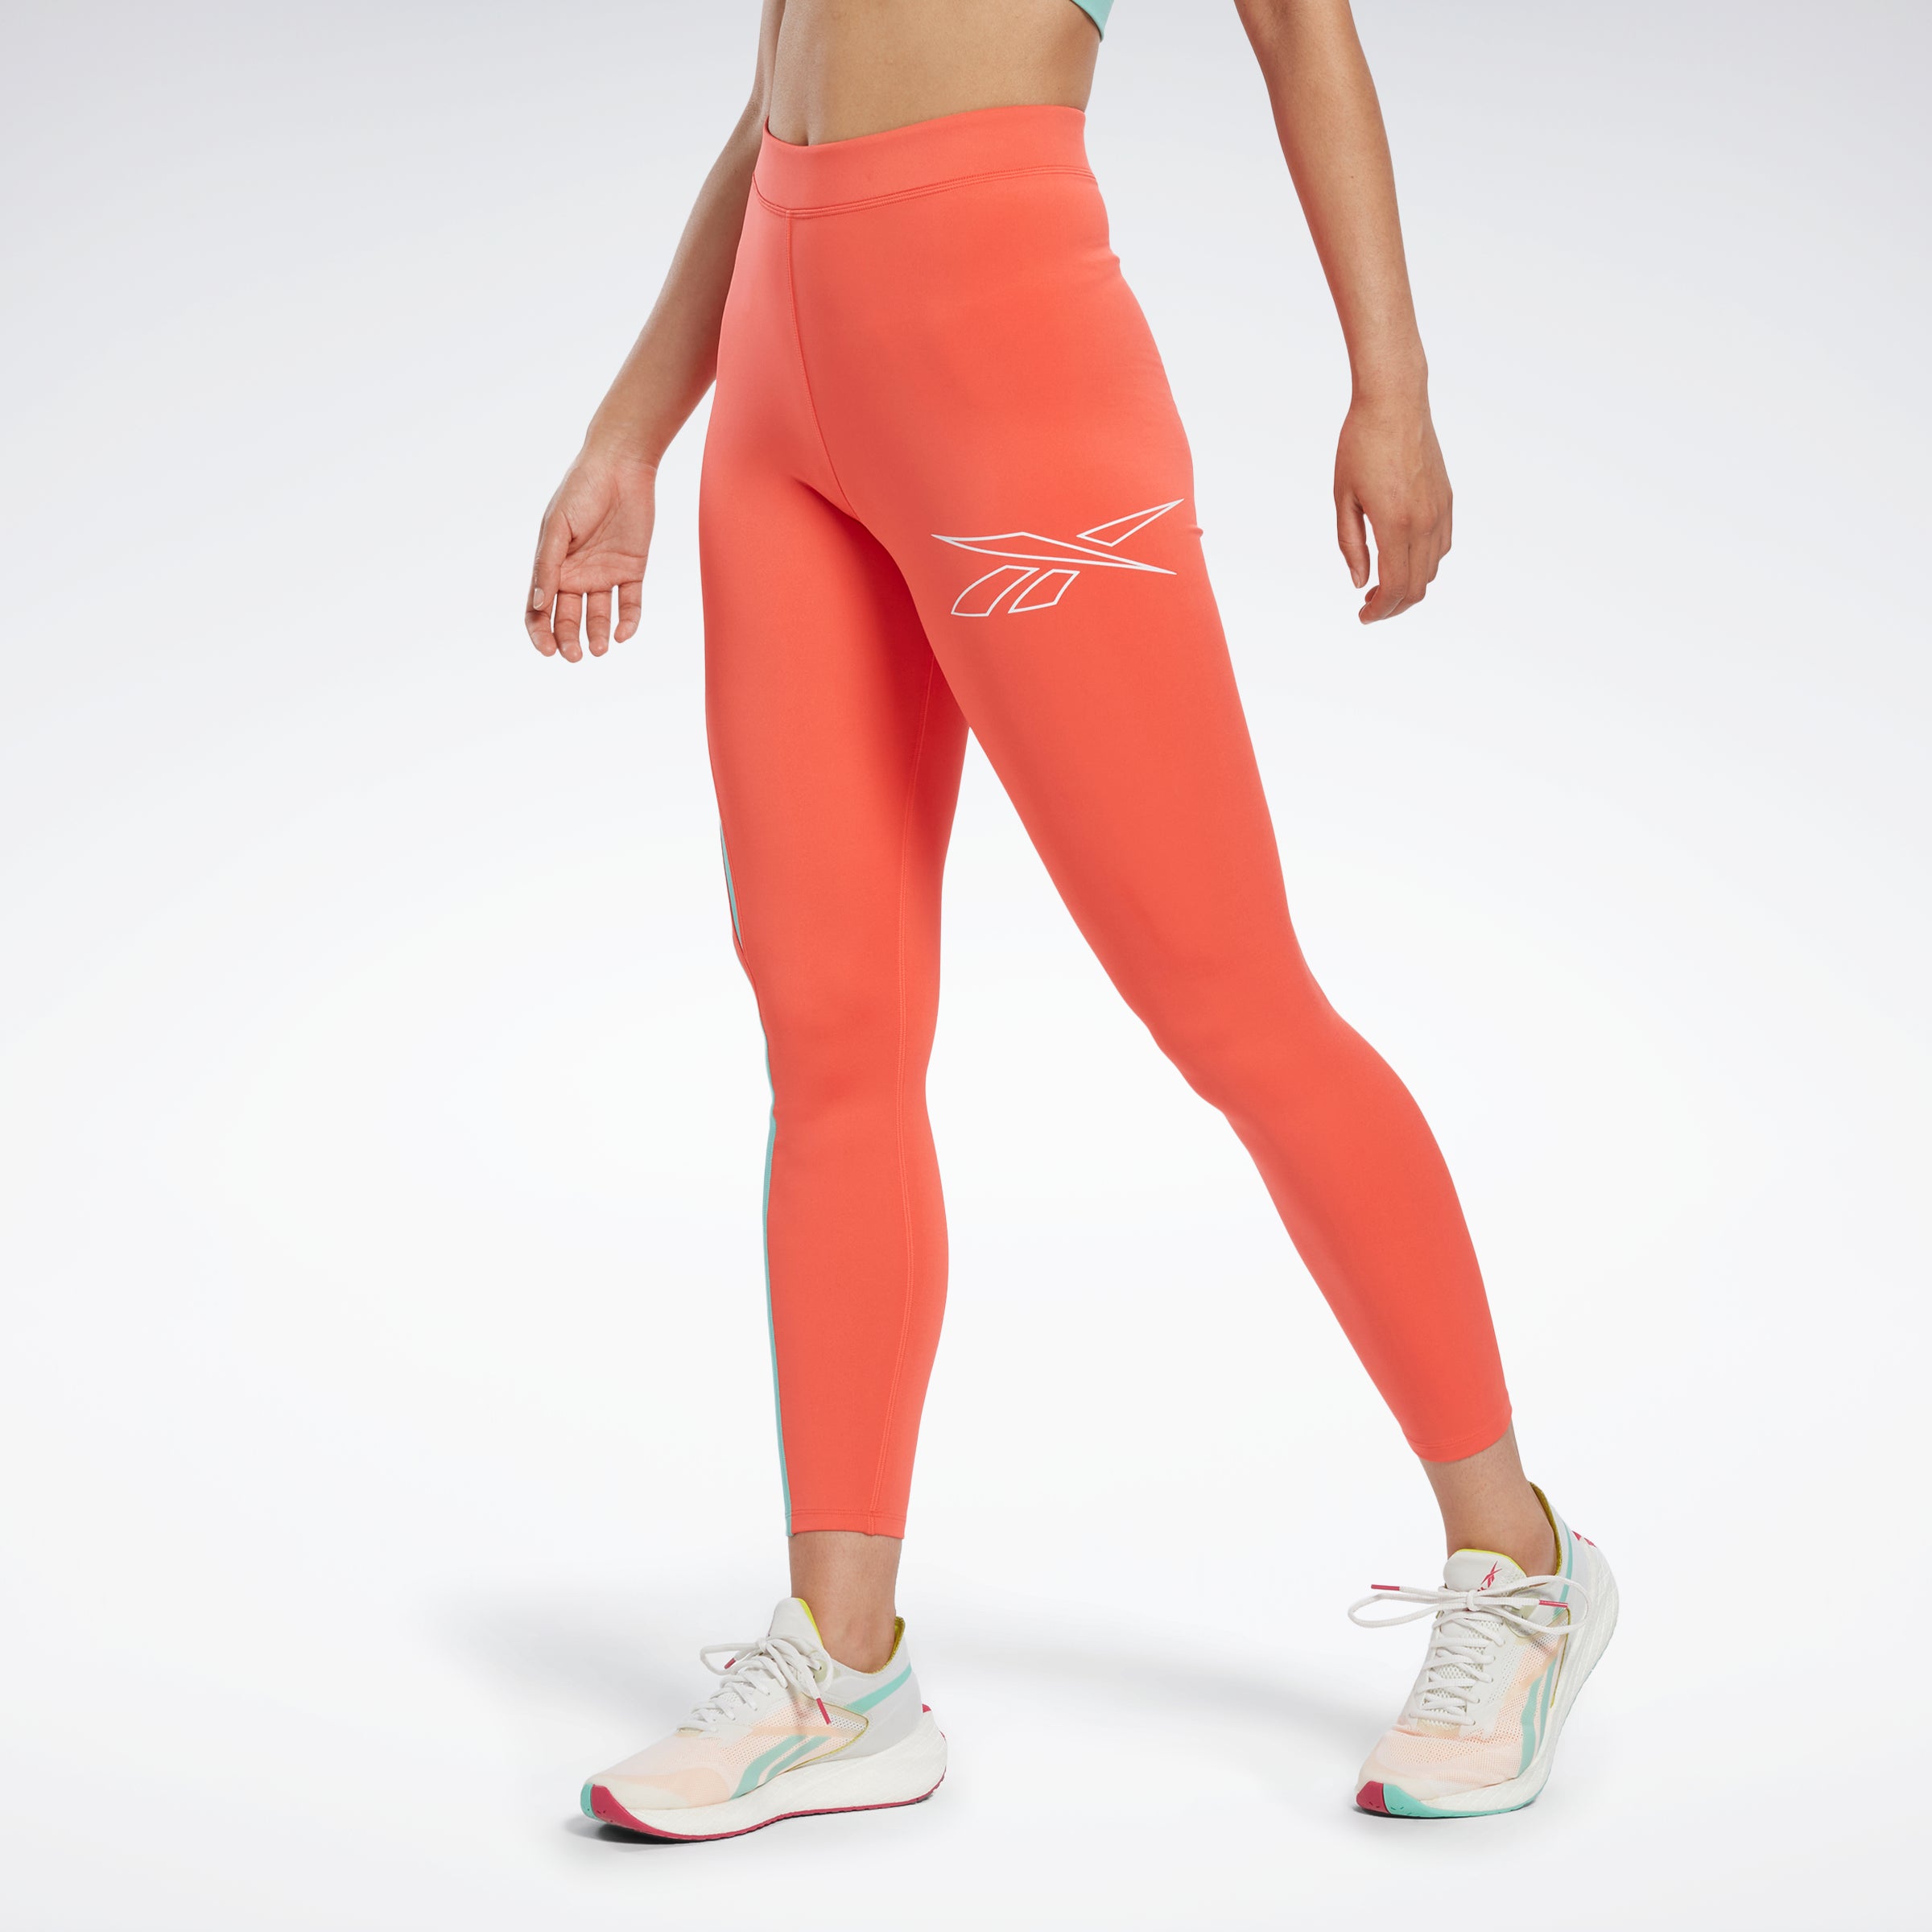 Skin Color (Beige) Dry Fit Women Pista Gym Legging at Rs 226 in